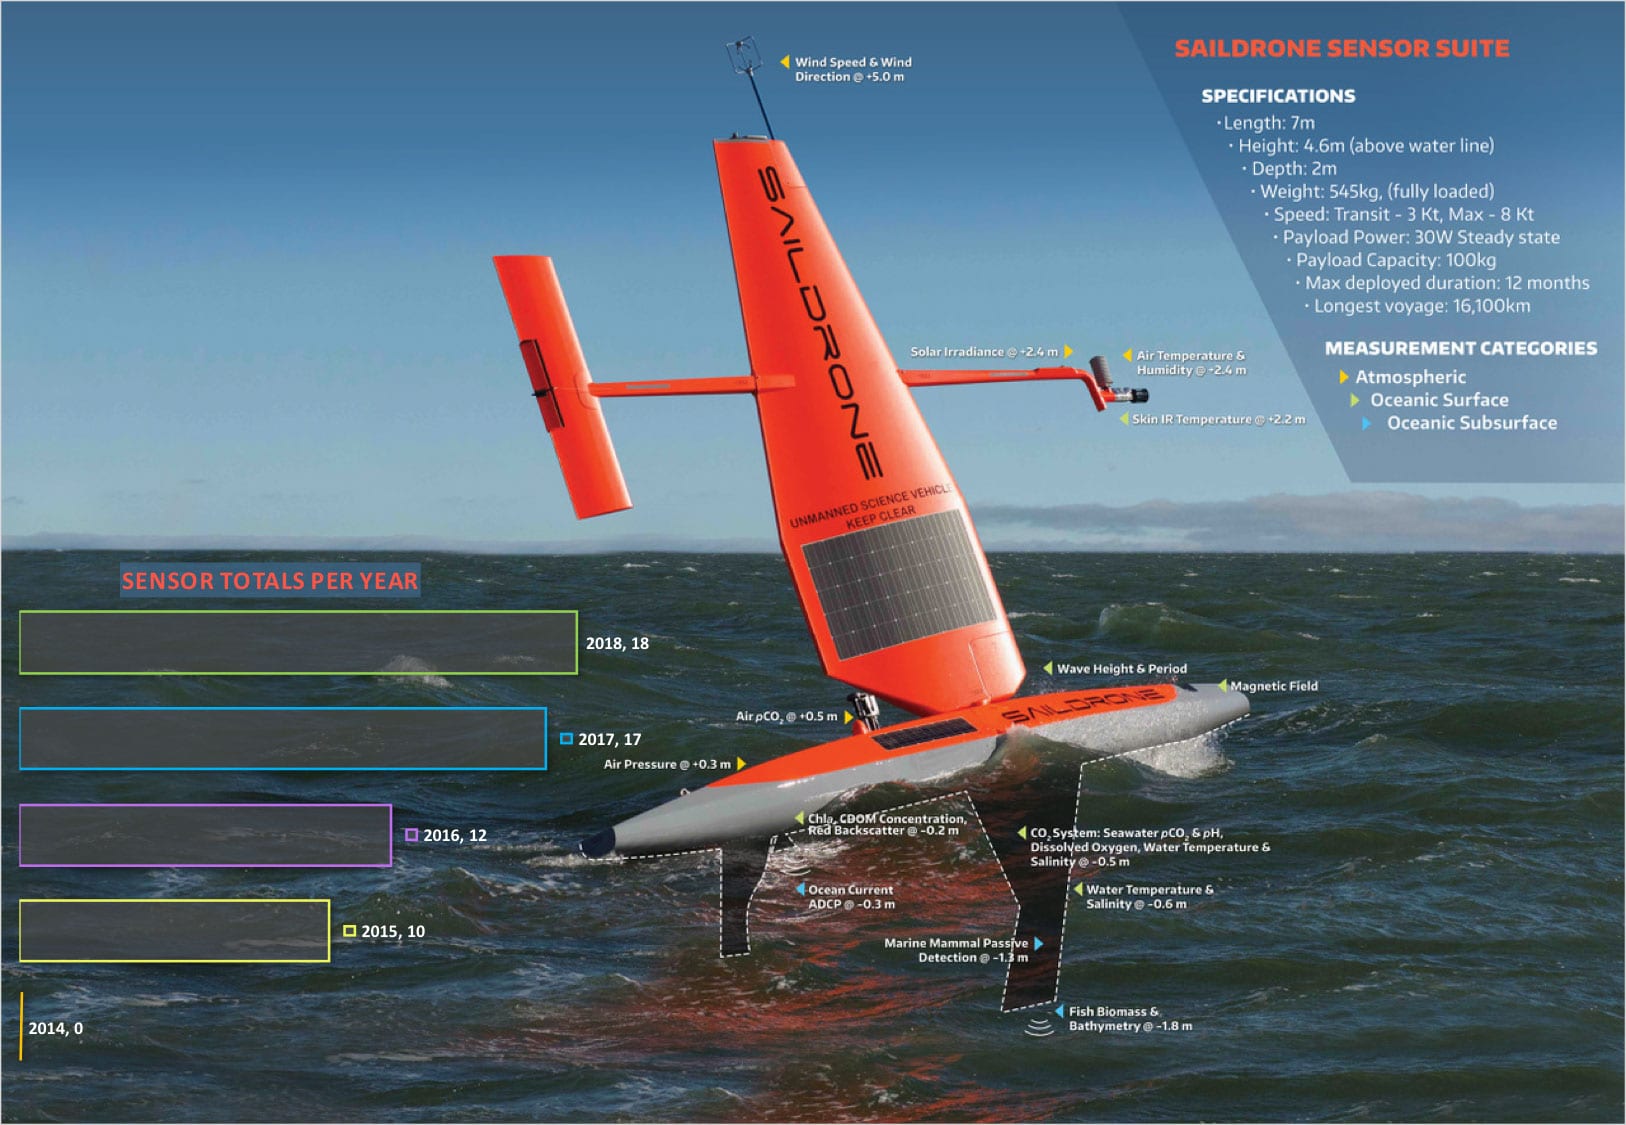 This infographic details the sensor capabilities of a saildrone. Since Saildrone Inc. and NOAA teamed up in 2014, new sensors have been added each year to collect a growing array of oceanographic, fisheries and meteorological data with a total of 18 sensors as of 2018. Download the Image to better read the text | University of Washington/NOAA